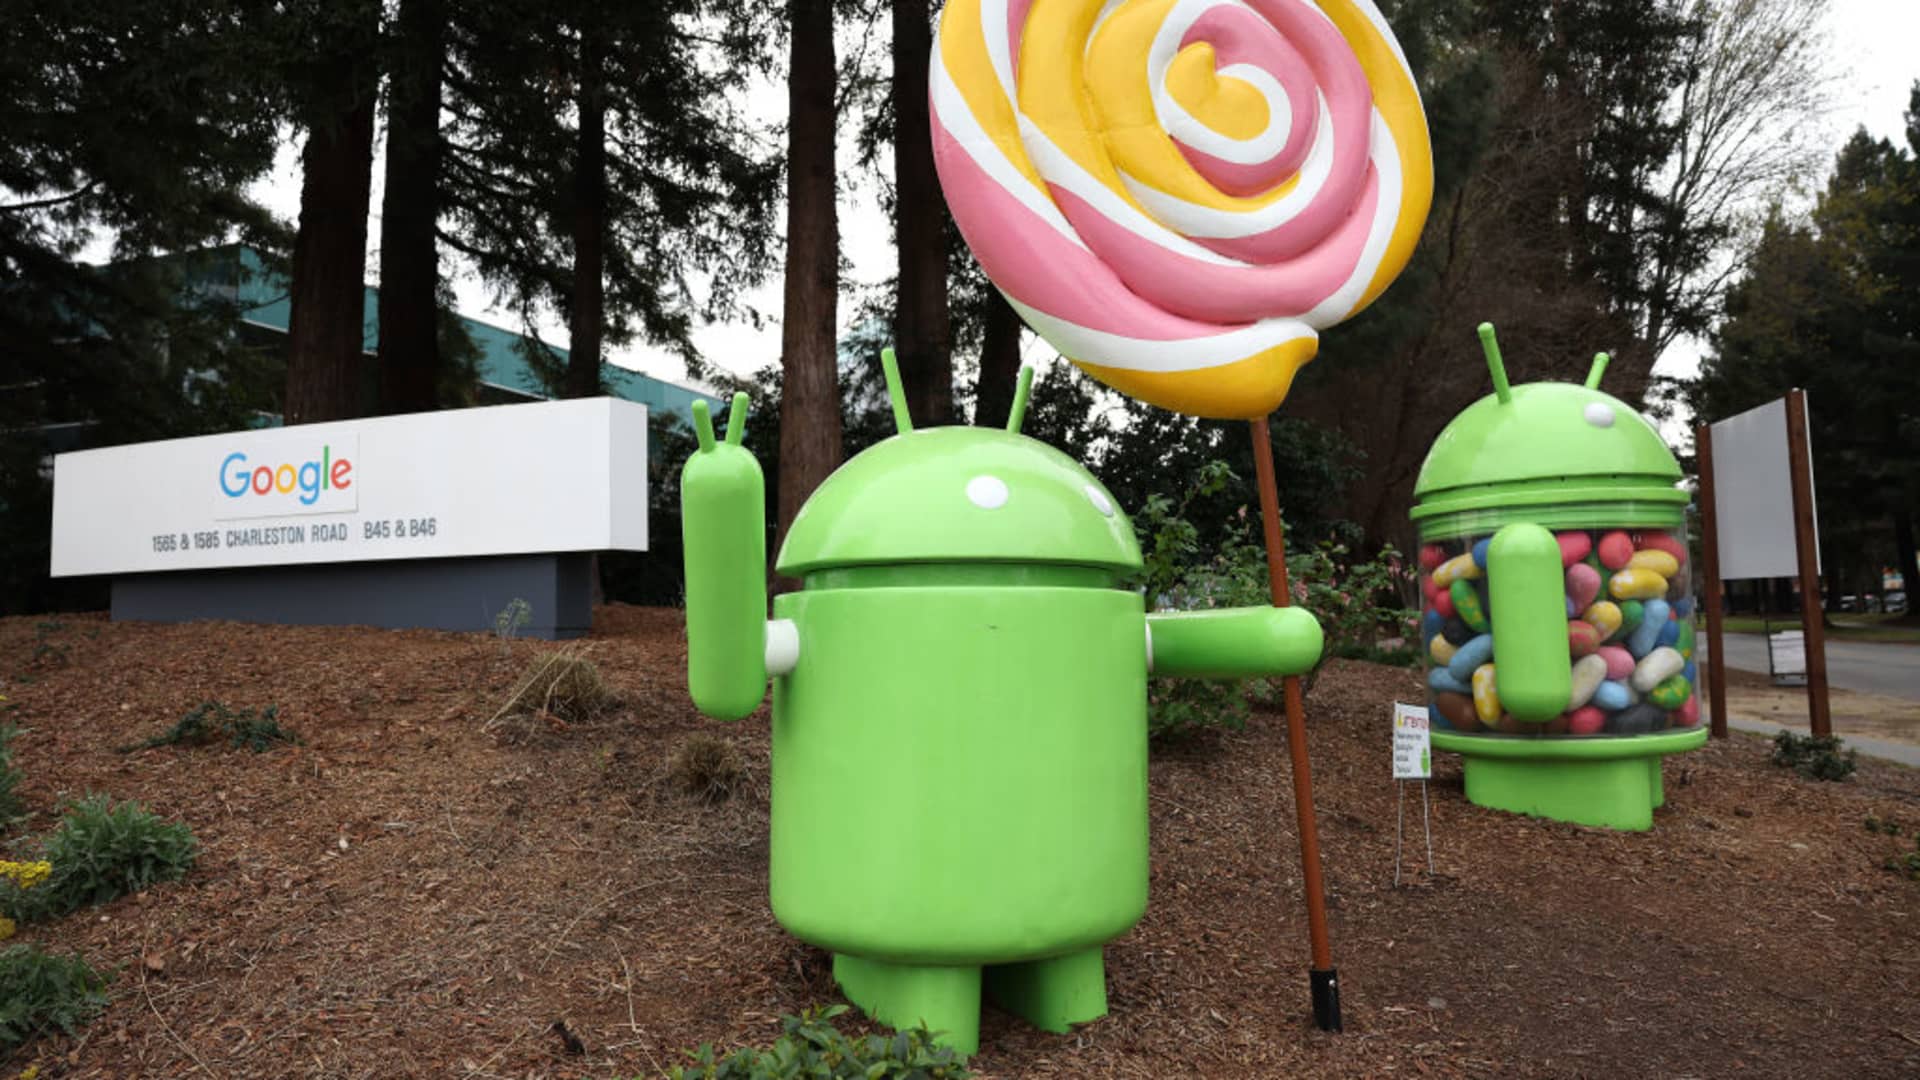 Android figures are displayed at Google headquarters on February 02, 2023 in Mountain View, California.